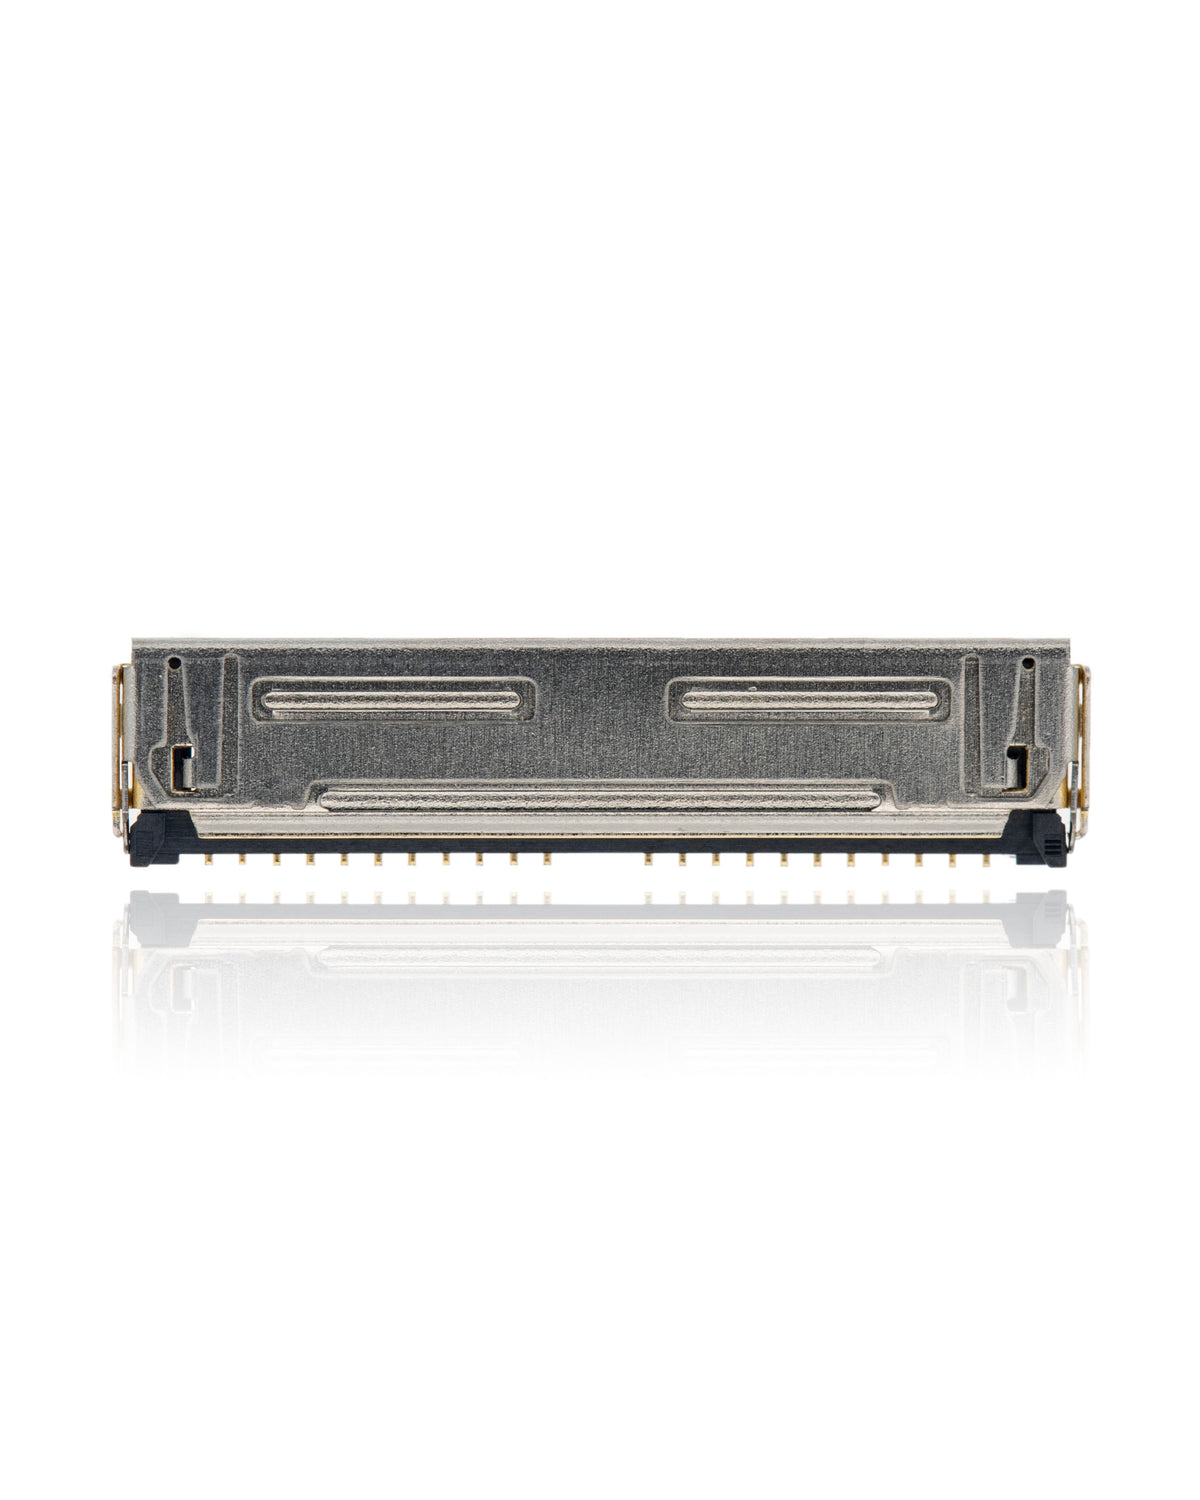 LCD DISPLAY EDP CONNECTOR (ON THE LOGIC BOARD) COMPATIBLE WITH MACBOOK RETINA 12" A1534 (EARLY 2015 / EARLY 2016 / MID 2017) (CFPA342-0250F: 518S00013 / J8300: 42 PIN)